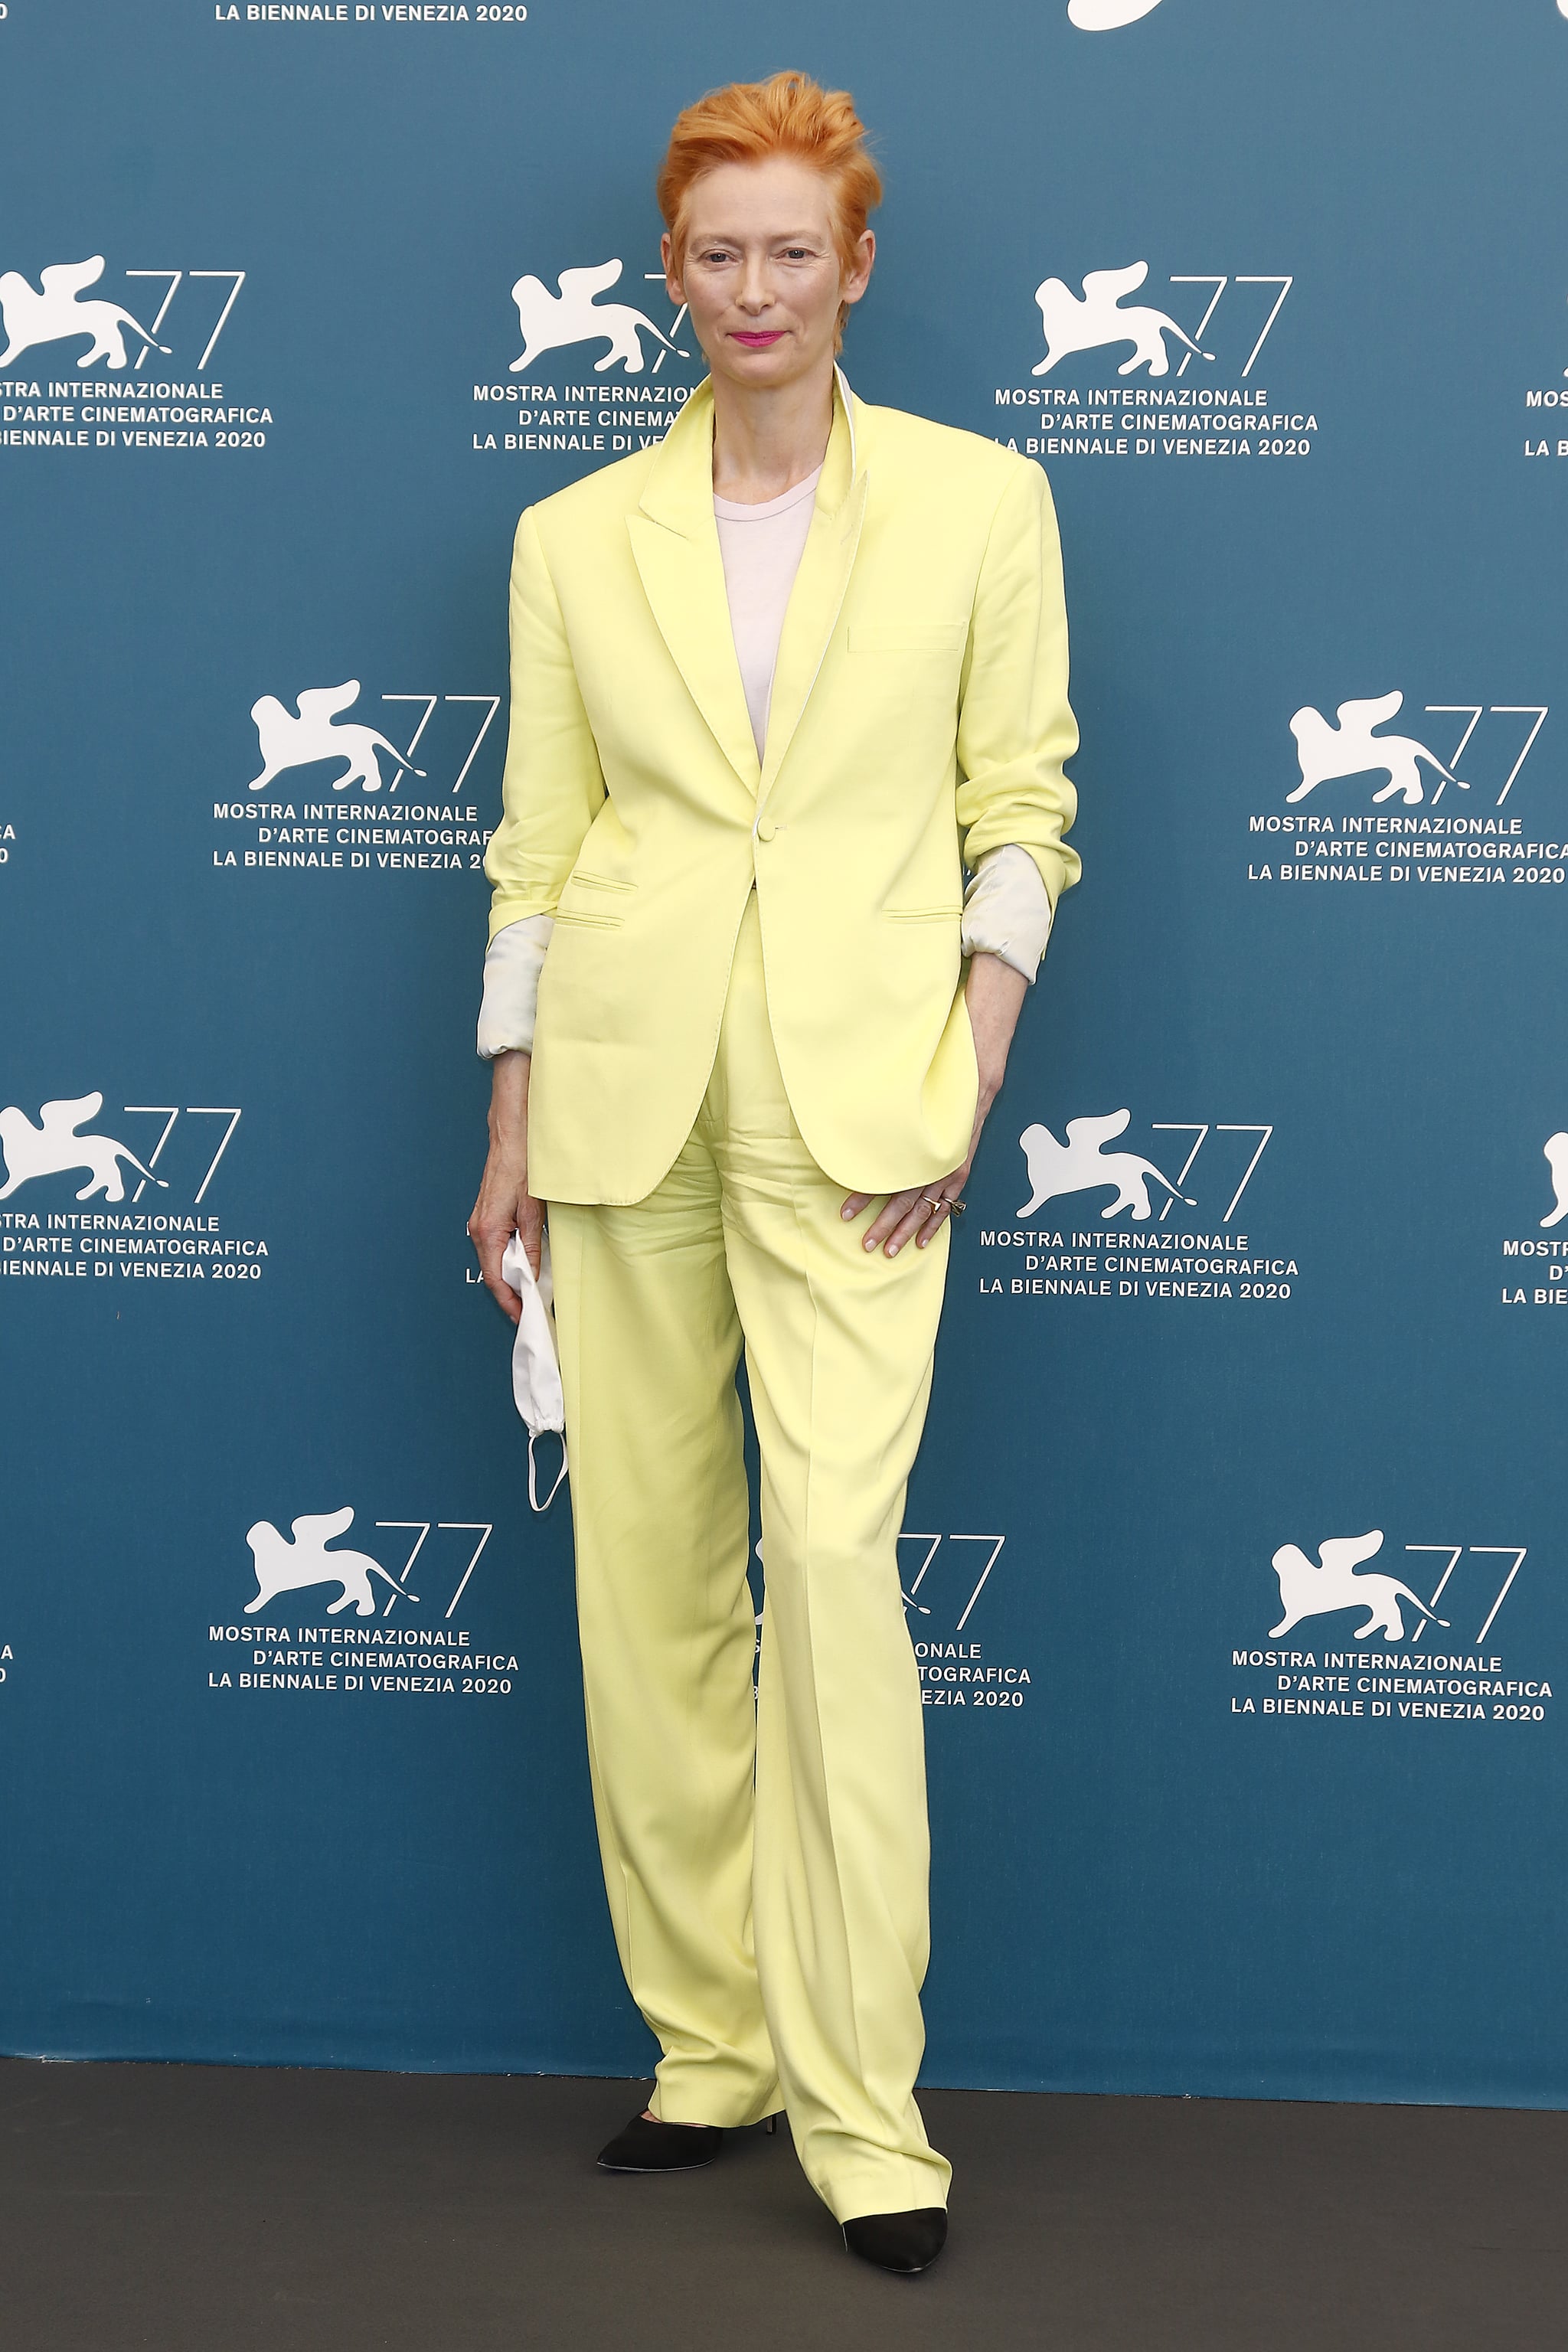 Tilda Swinton wore a citrus-coloured suit to the photocall for The Human Voice.